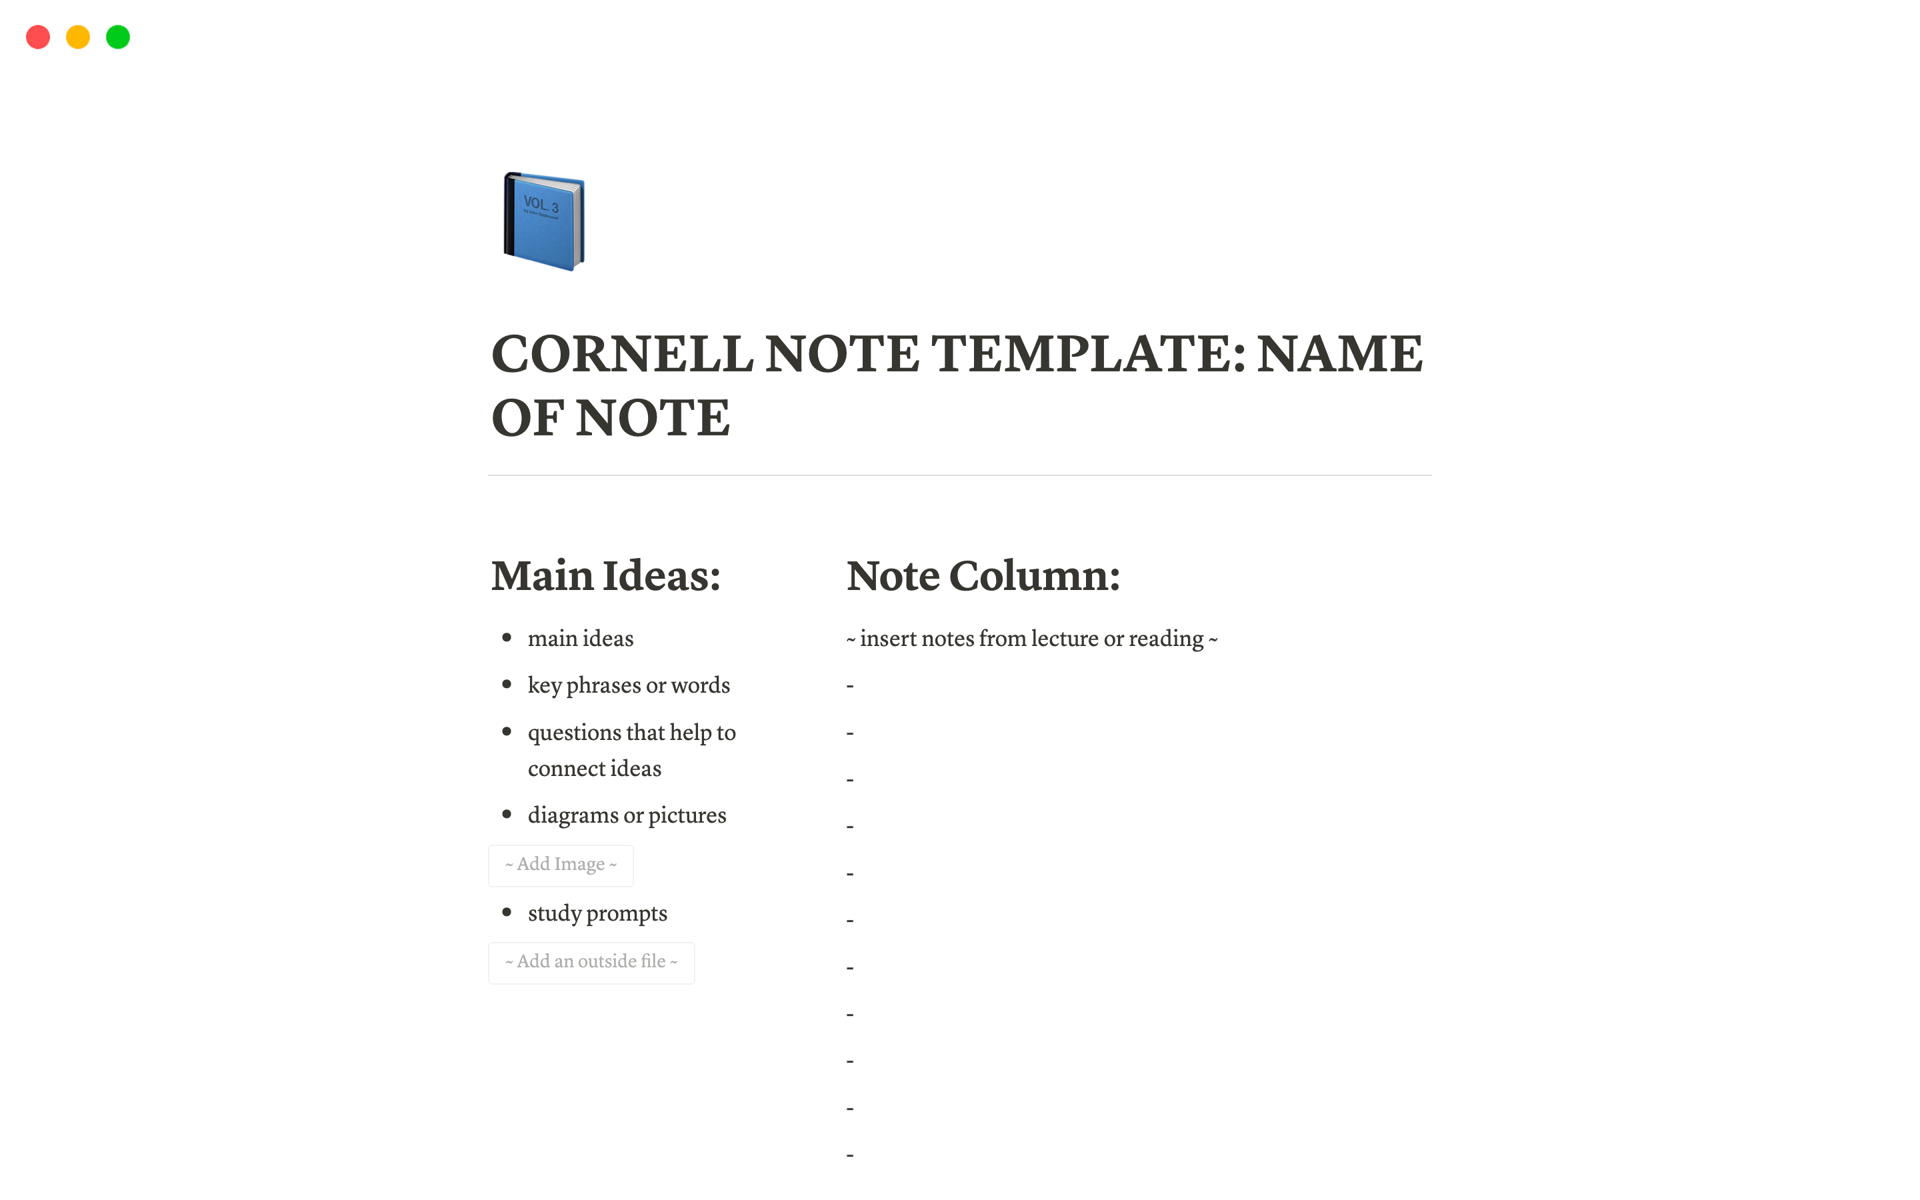 https://images.ctfassets.net/spoqsaf9291f/zujcGAEQIdUYe5PuZAJW1/2c11aacc6009a2867f18261a02f31c1a/cornell-note-taking-template-with-ai-a-basic-notion-b-desktop.png